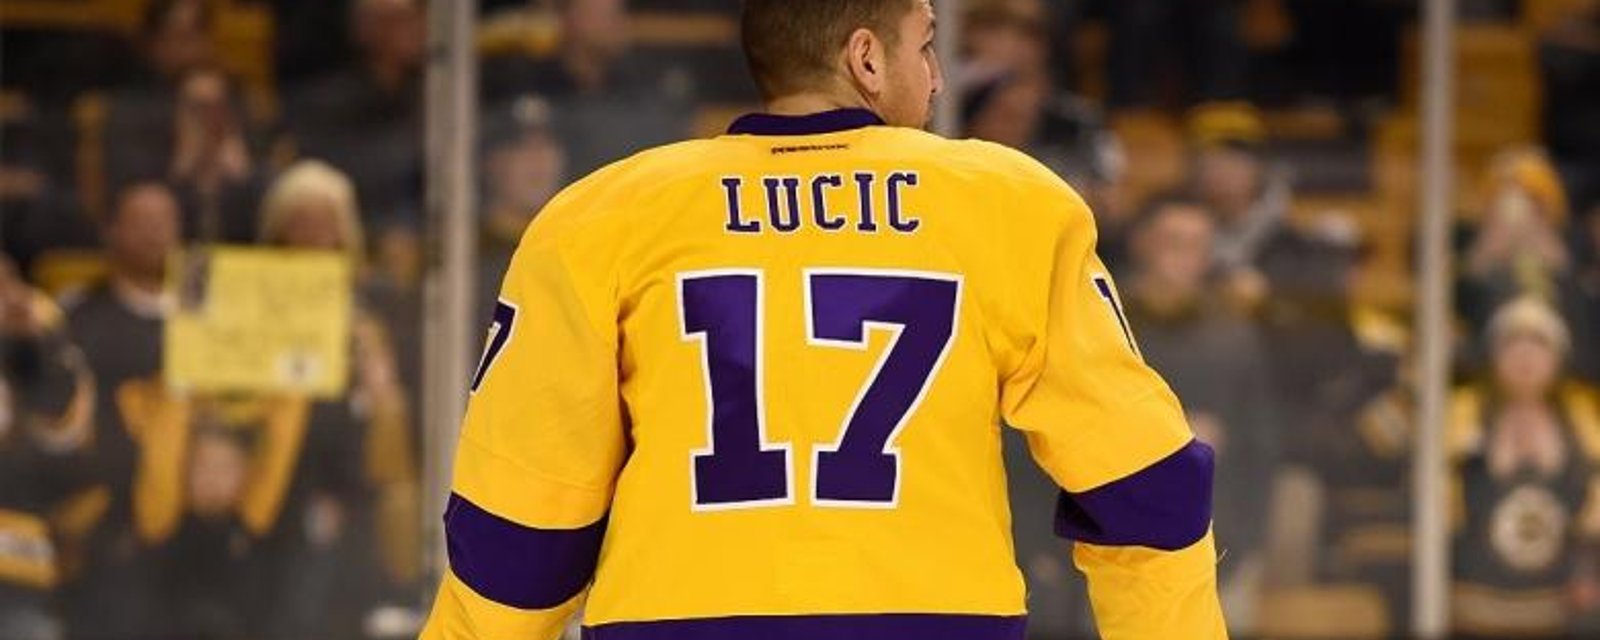 Details of Lucic's contract show it could be big trouble for Edmonton down the line.